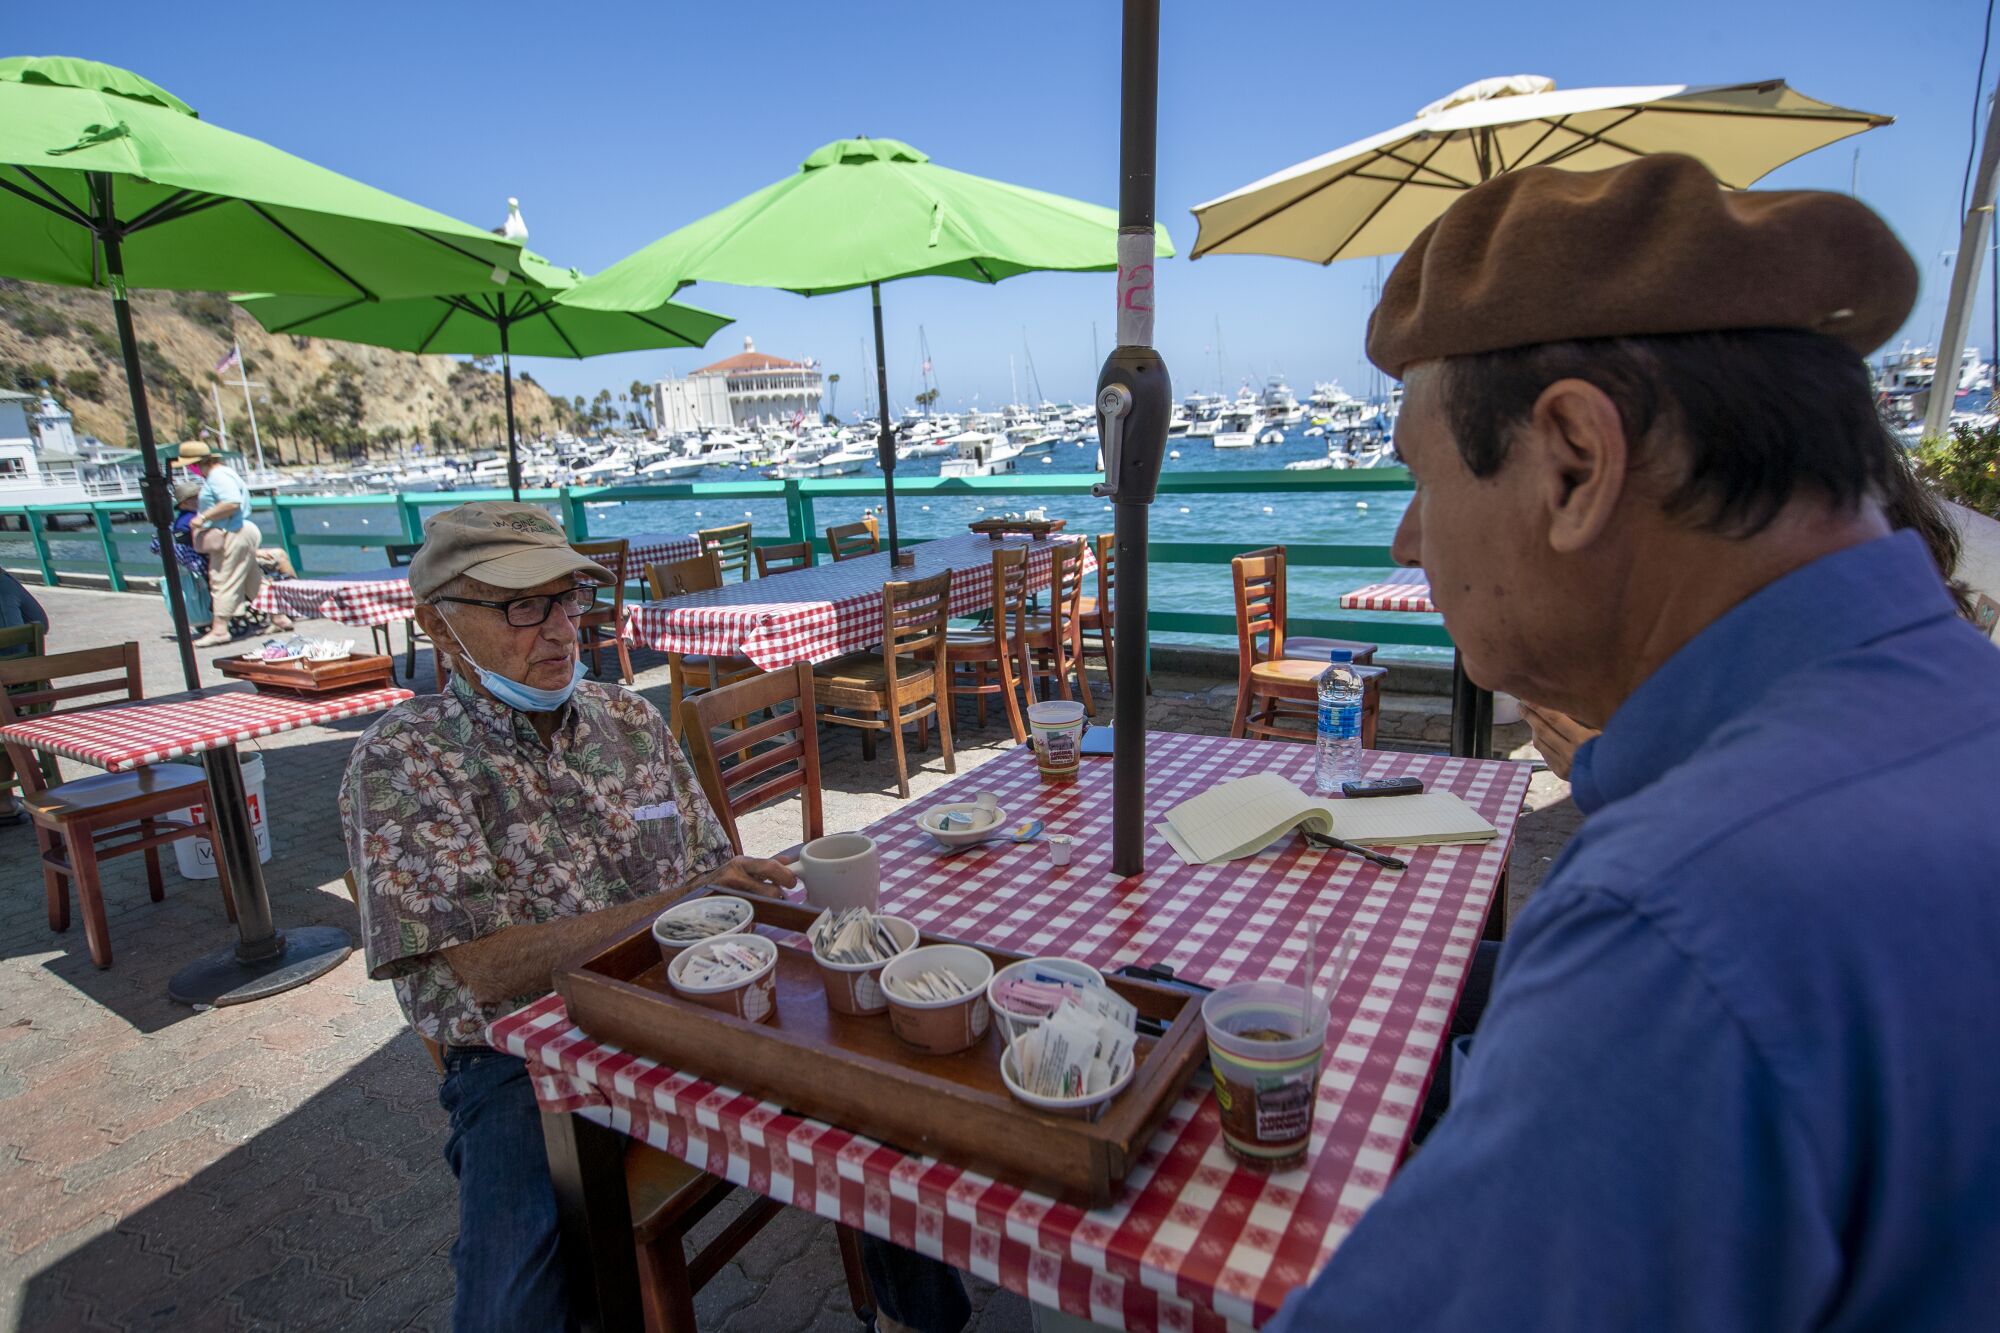 David Sanchez, right, talks to Catalina Island resident Rudy Piltch outside at a restaurant in Avalon.